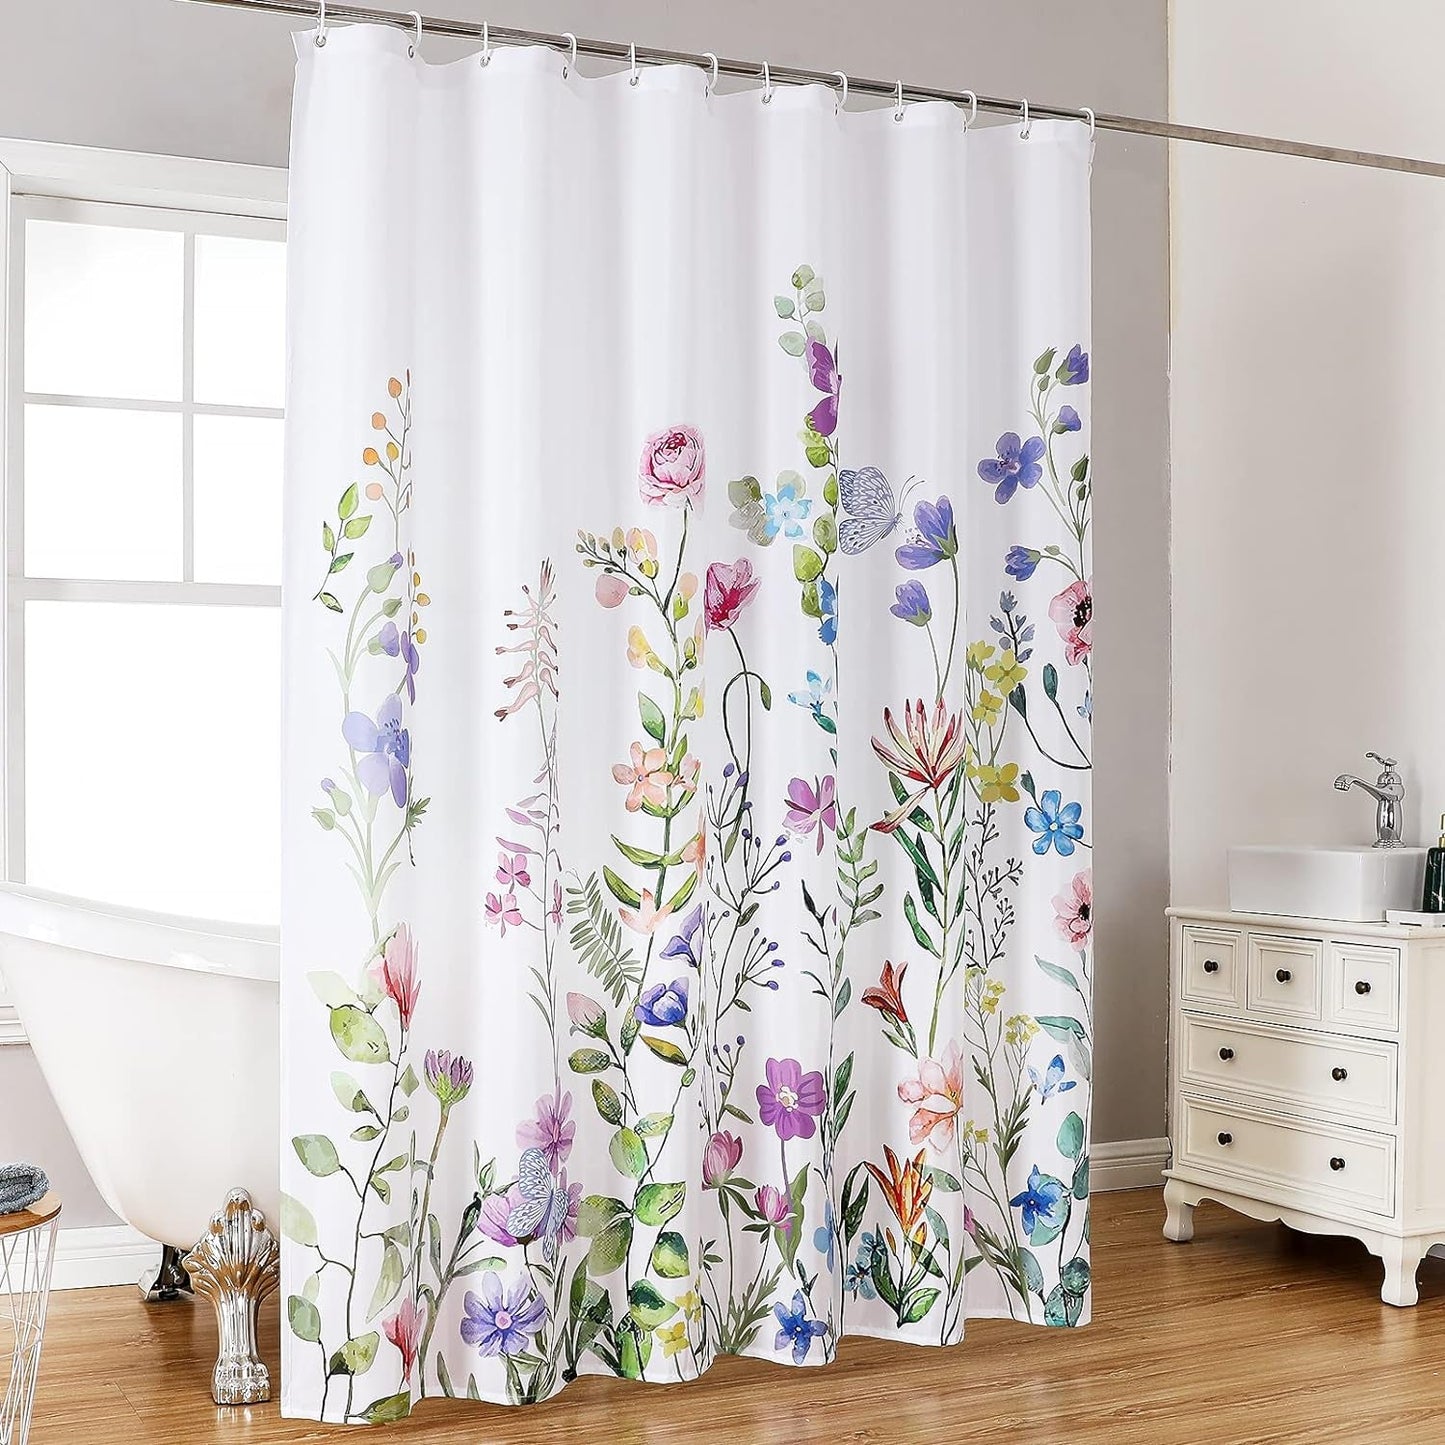 Floral Shower Curtain with 12 Hooks, 72''X72'' Waterproof Polyester Fabric Plant Shower Curtain for Bathroom, Heavy Weighted Hem Bathroom Curtain, Machine Washable, Quick Dry